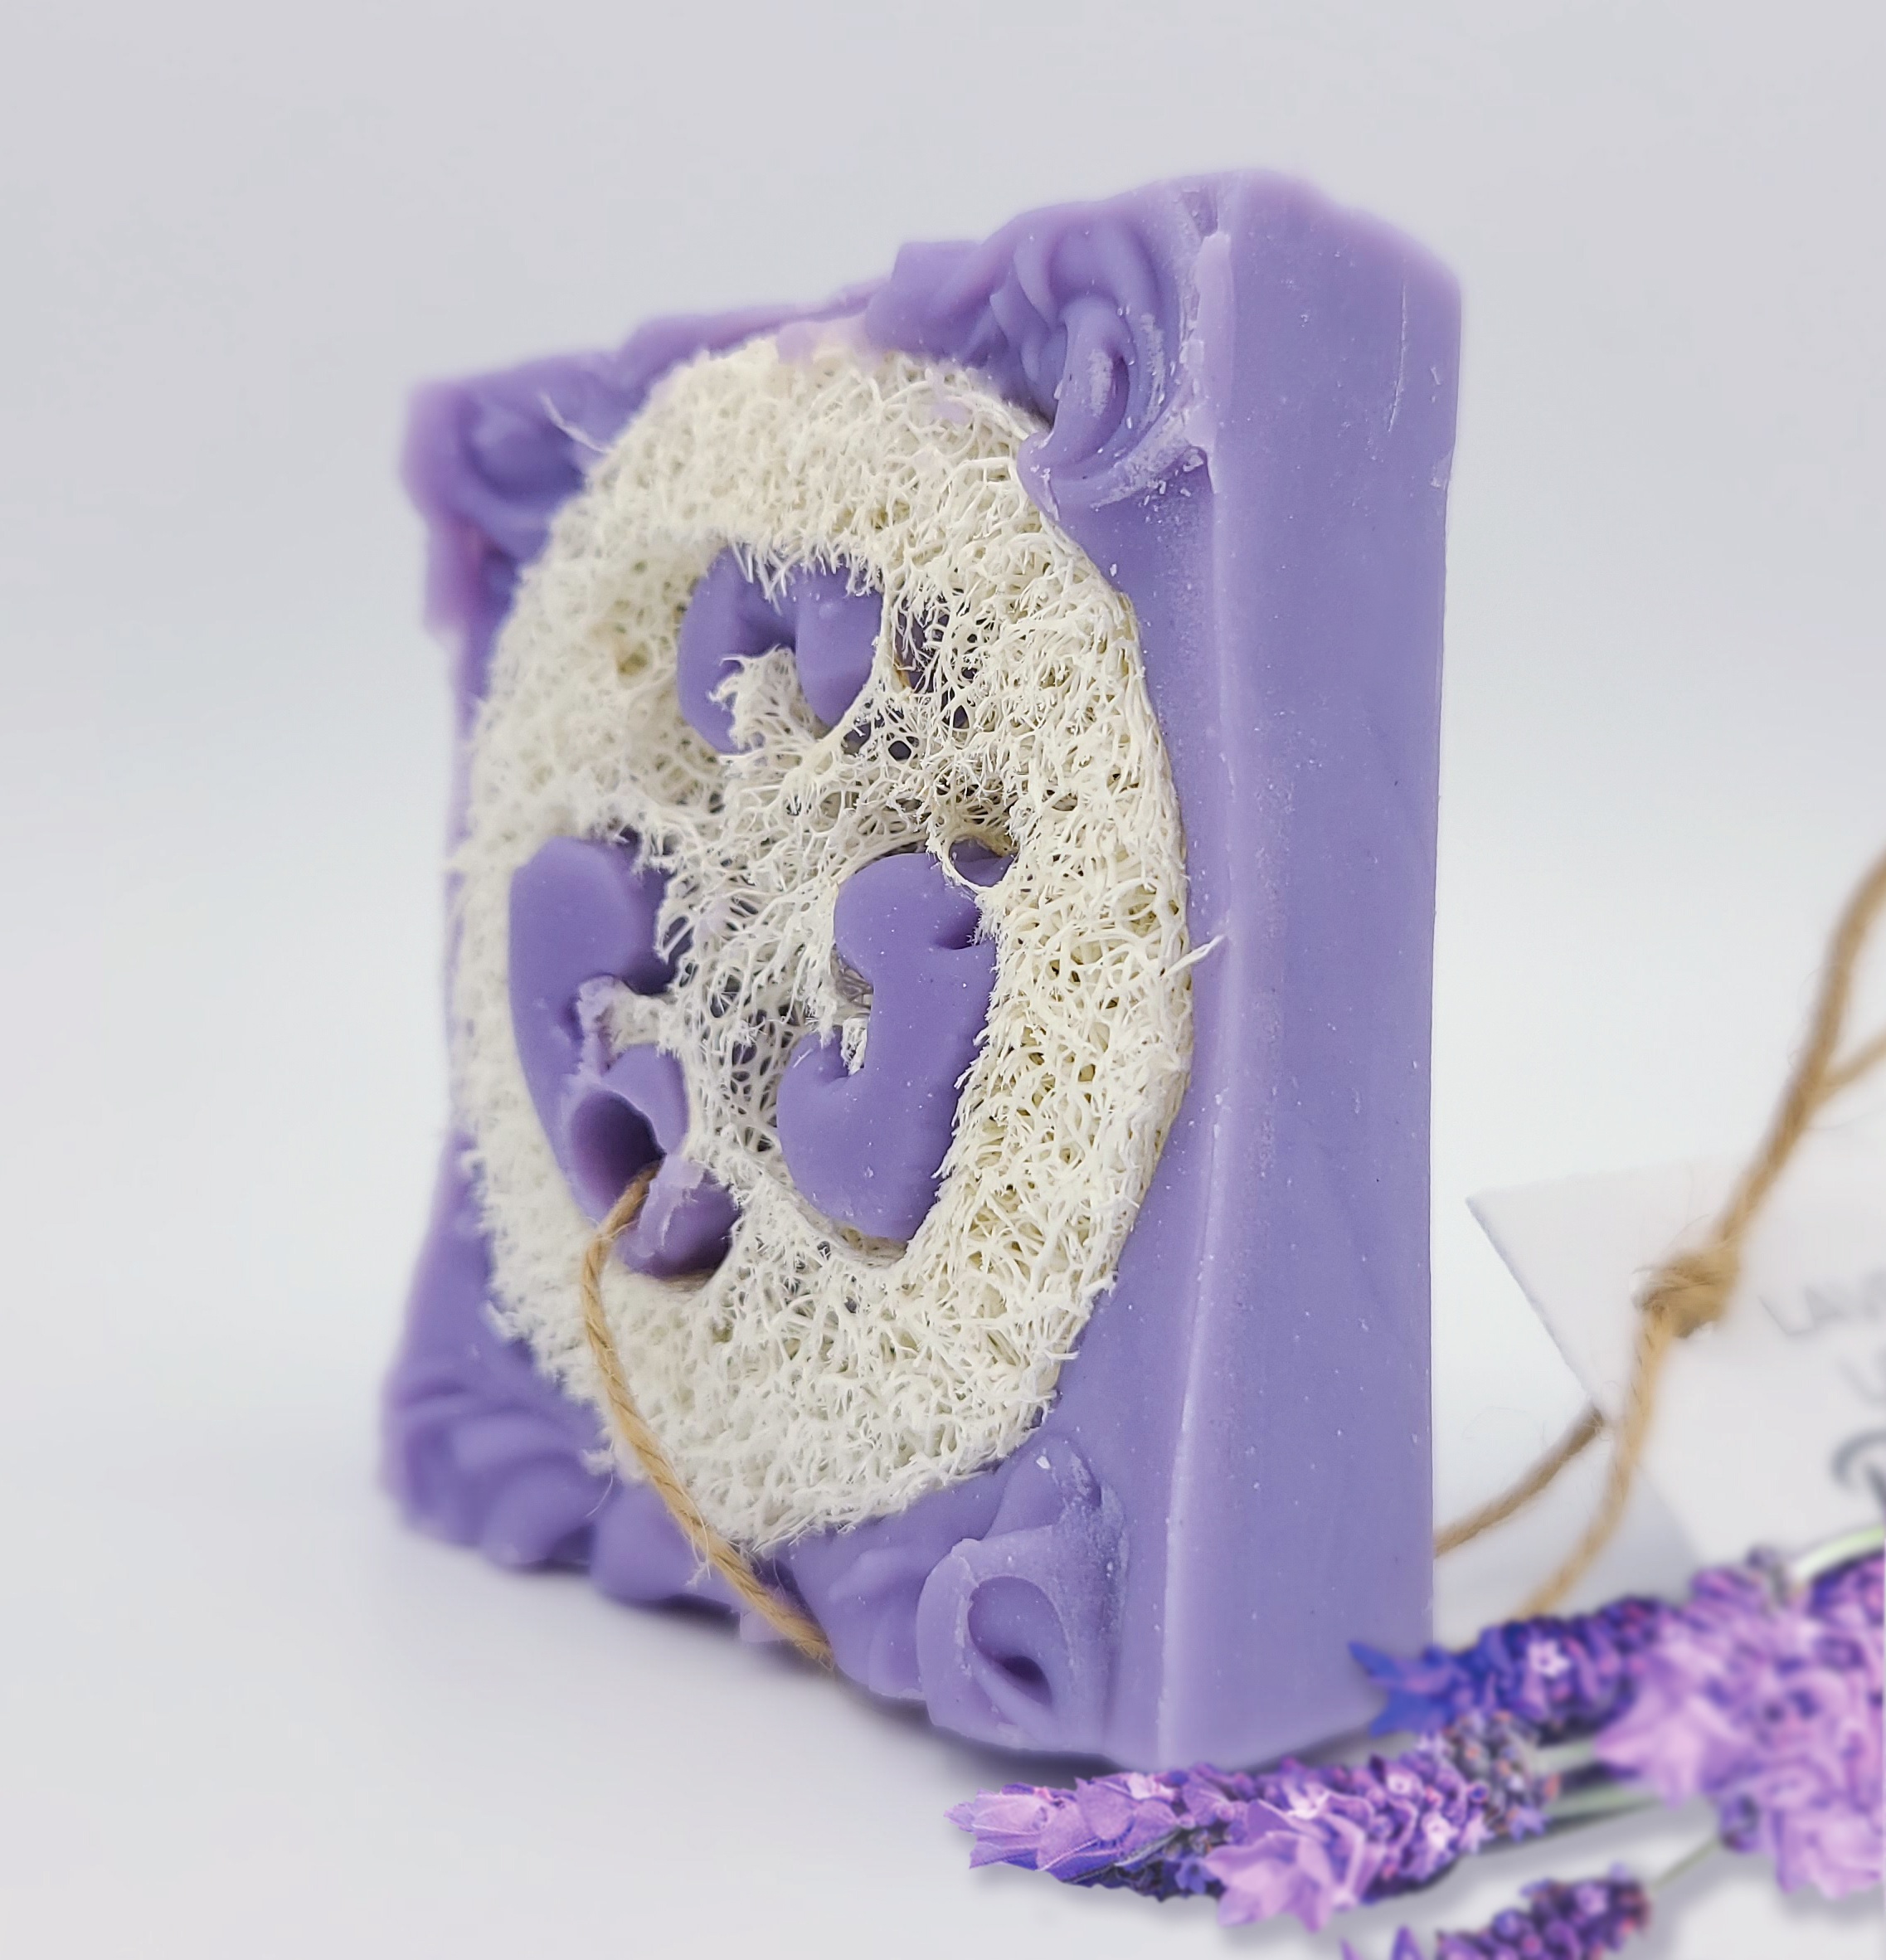 Lavender Loofah Exfoliating Soap Product Image